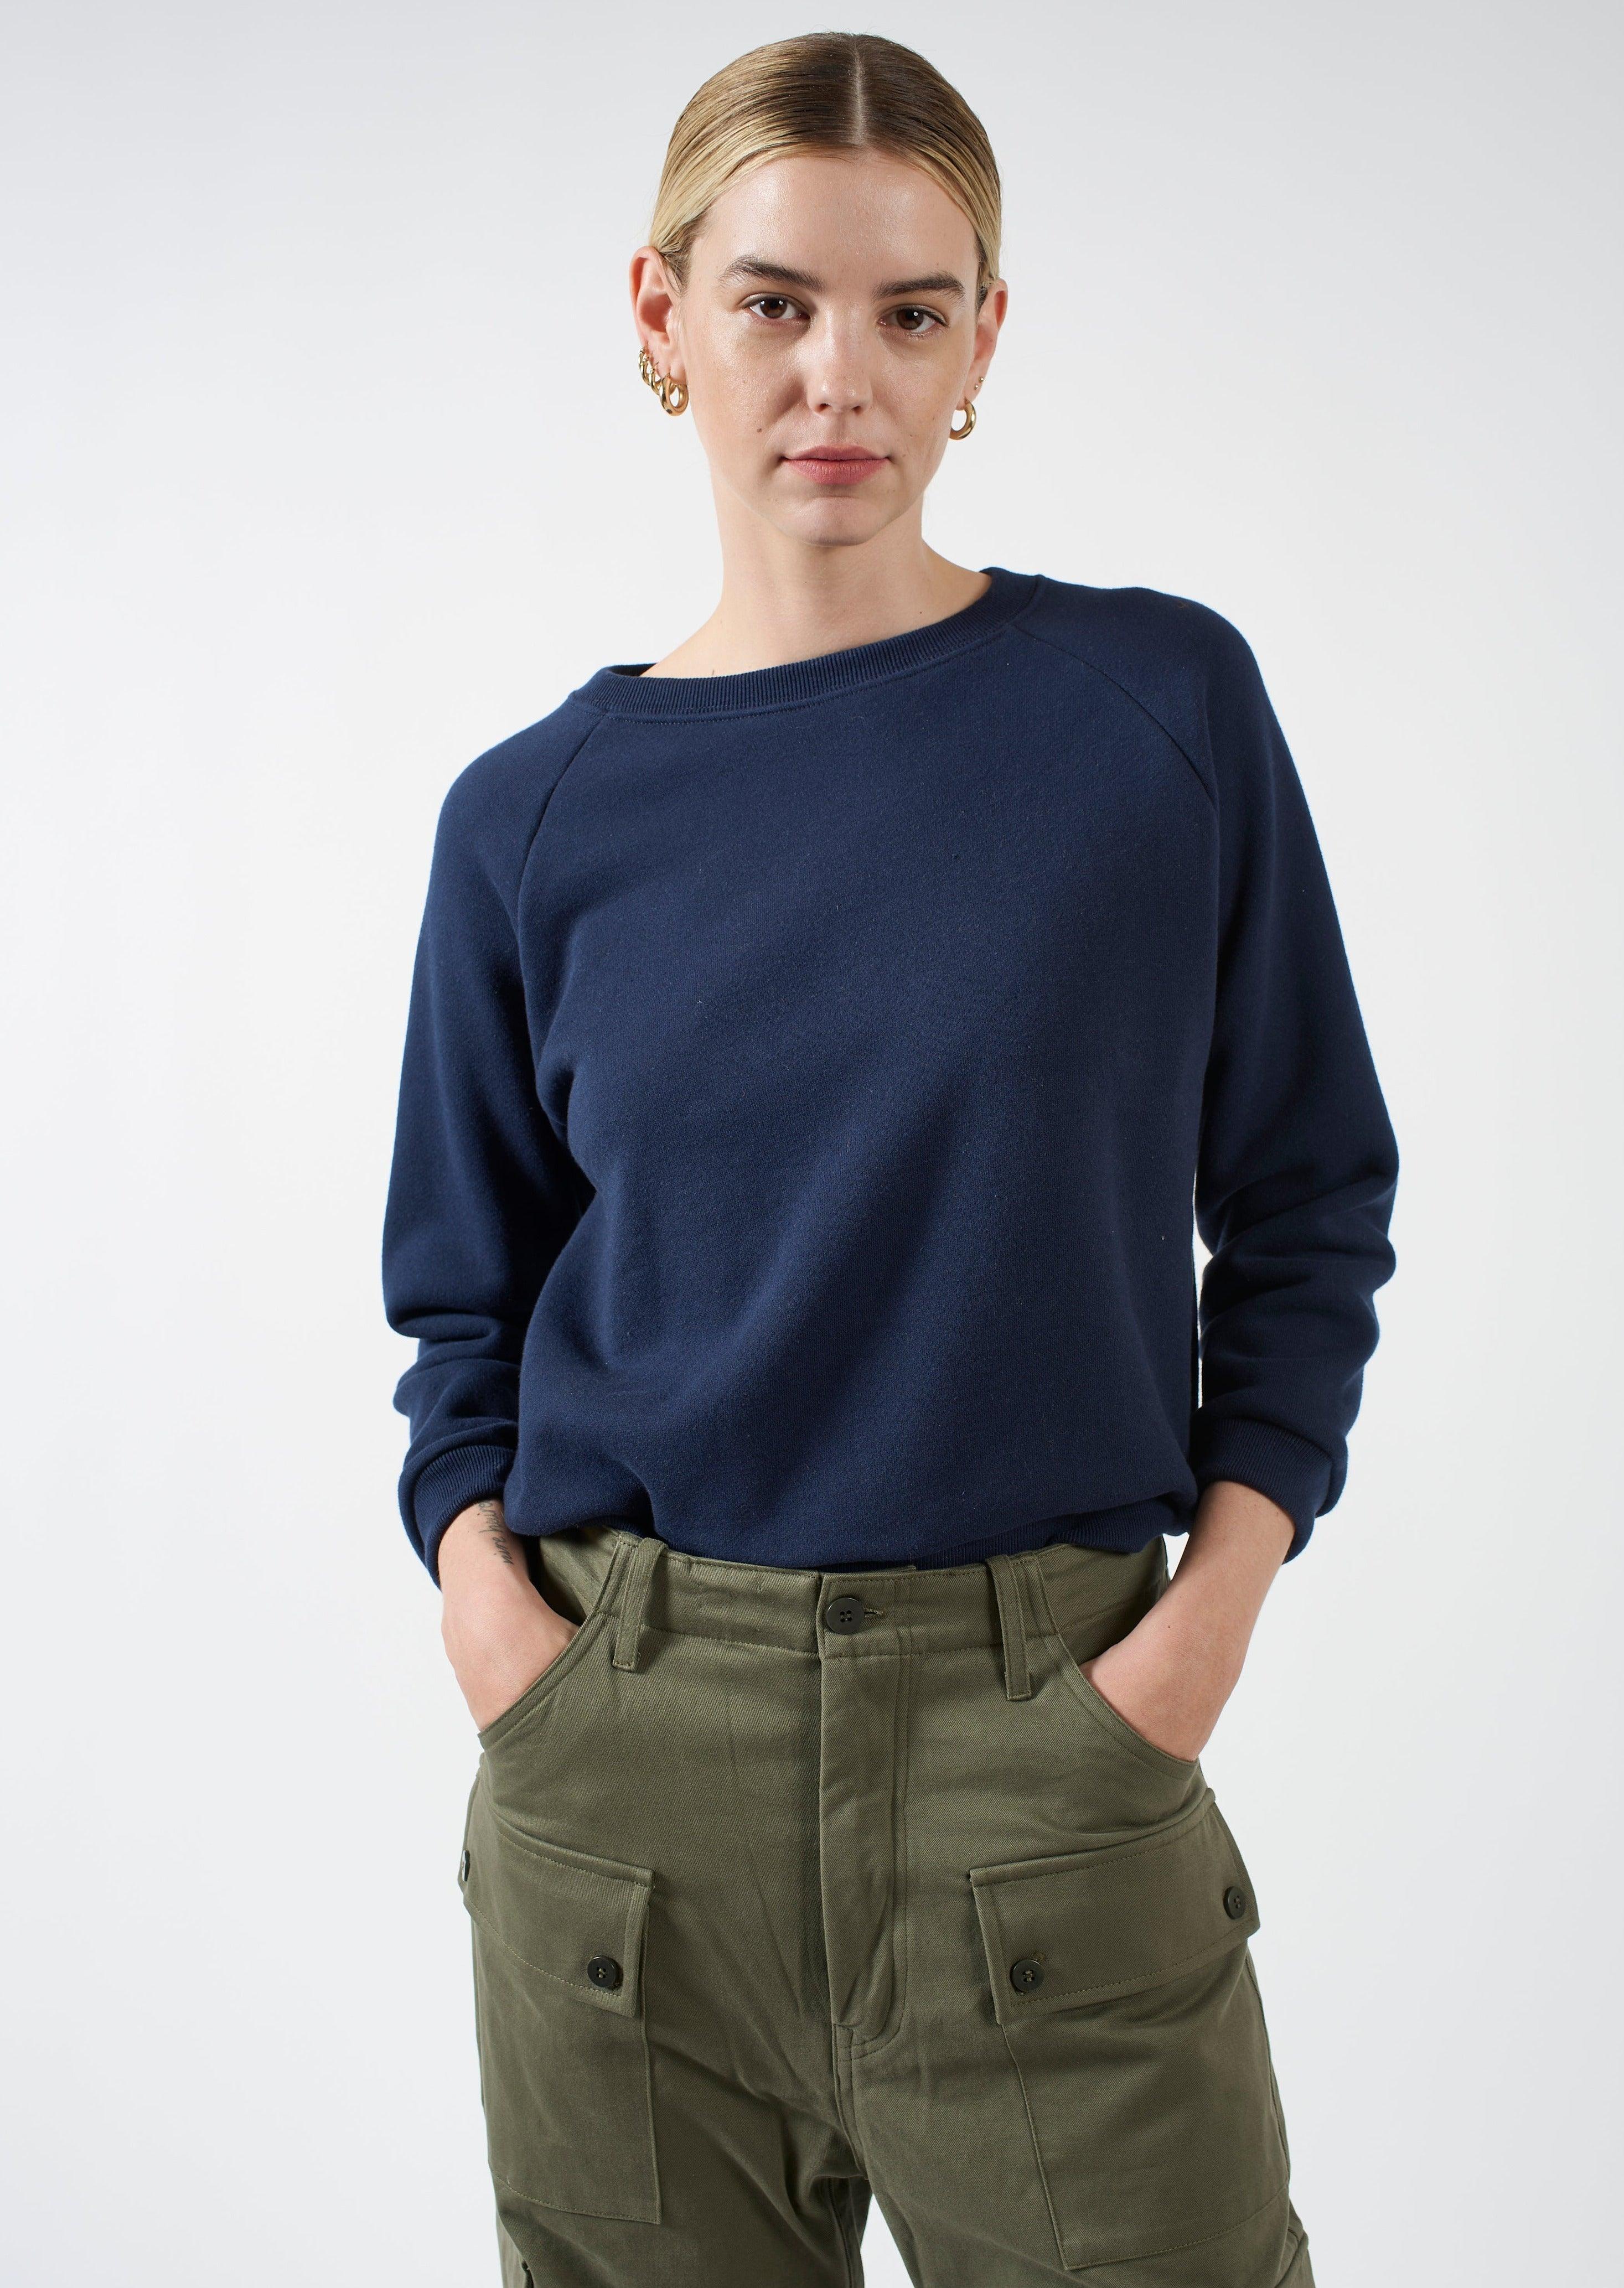 The Daily Sweatshirt in Navy Close Up Front